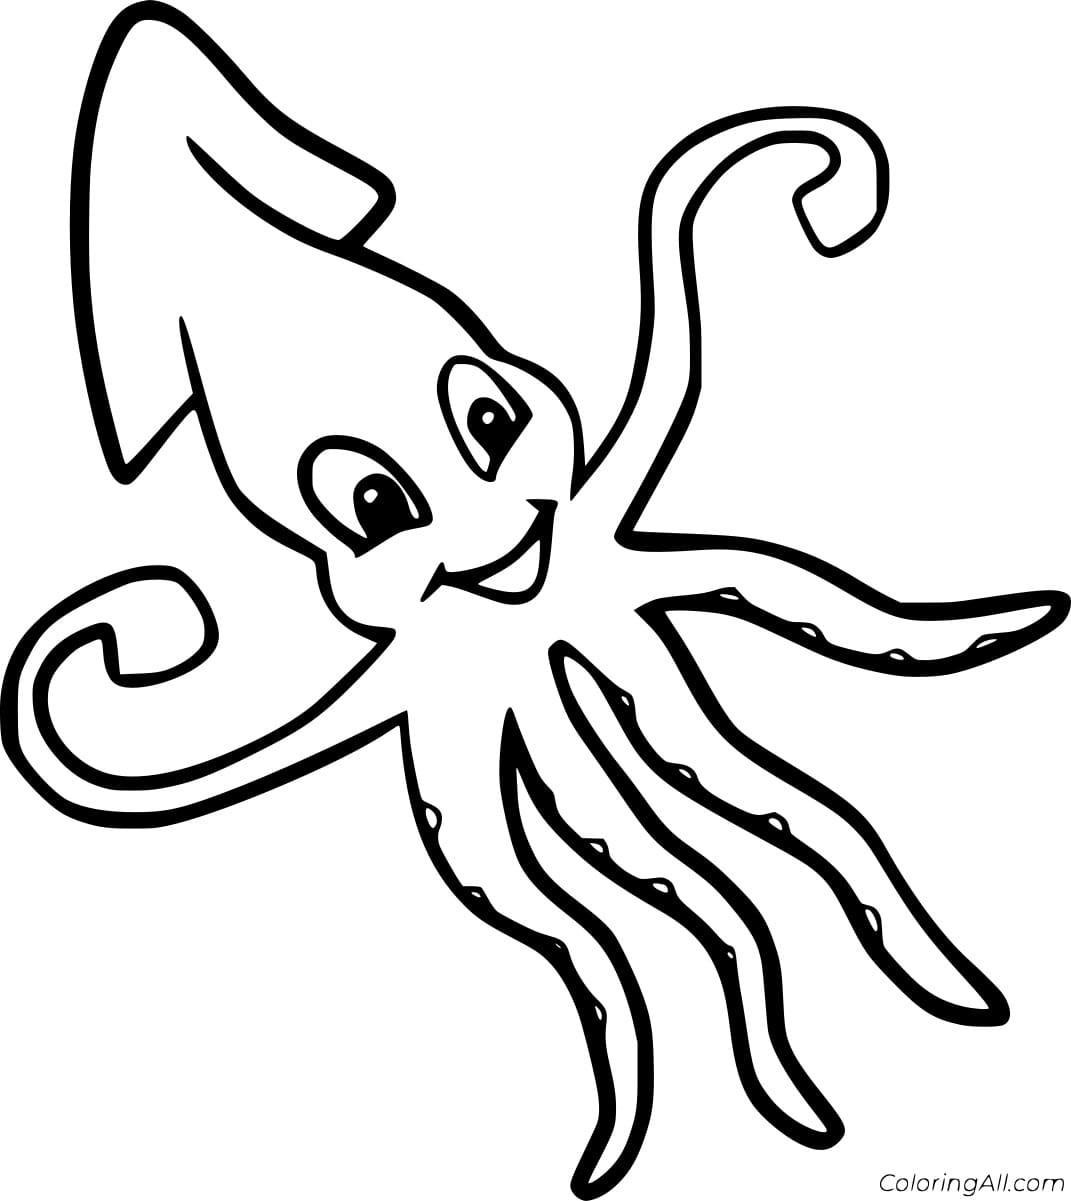 Free Printable Smiling Squid Coloring Page